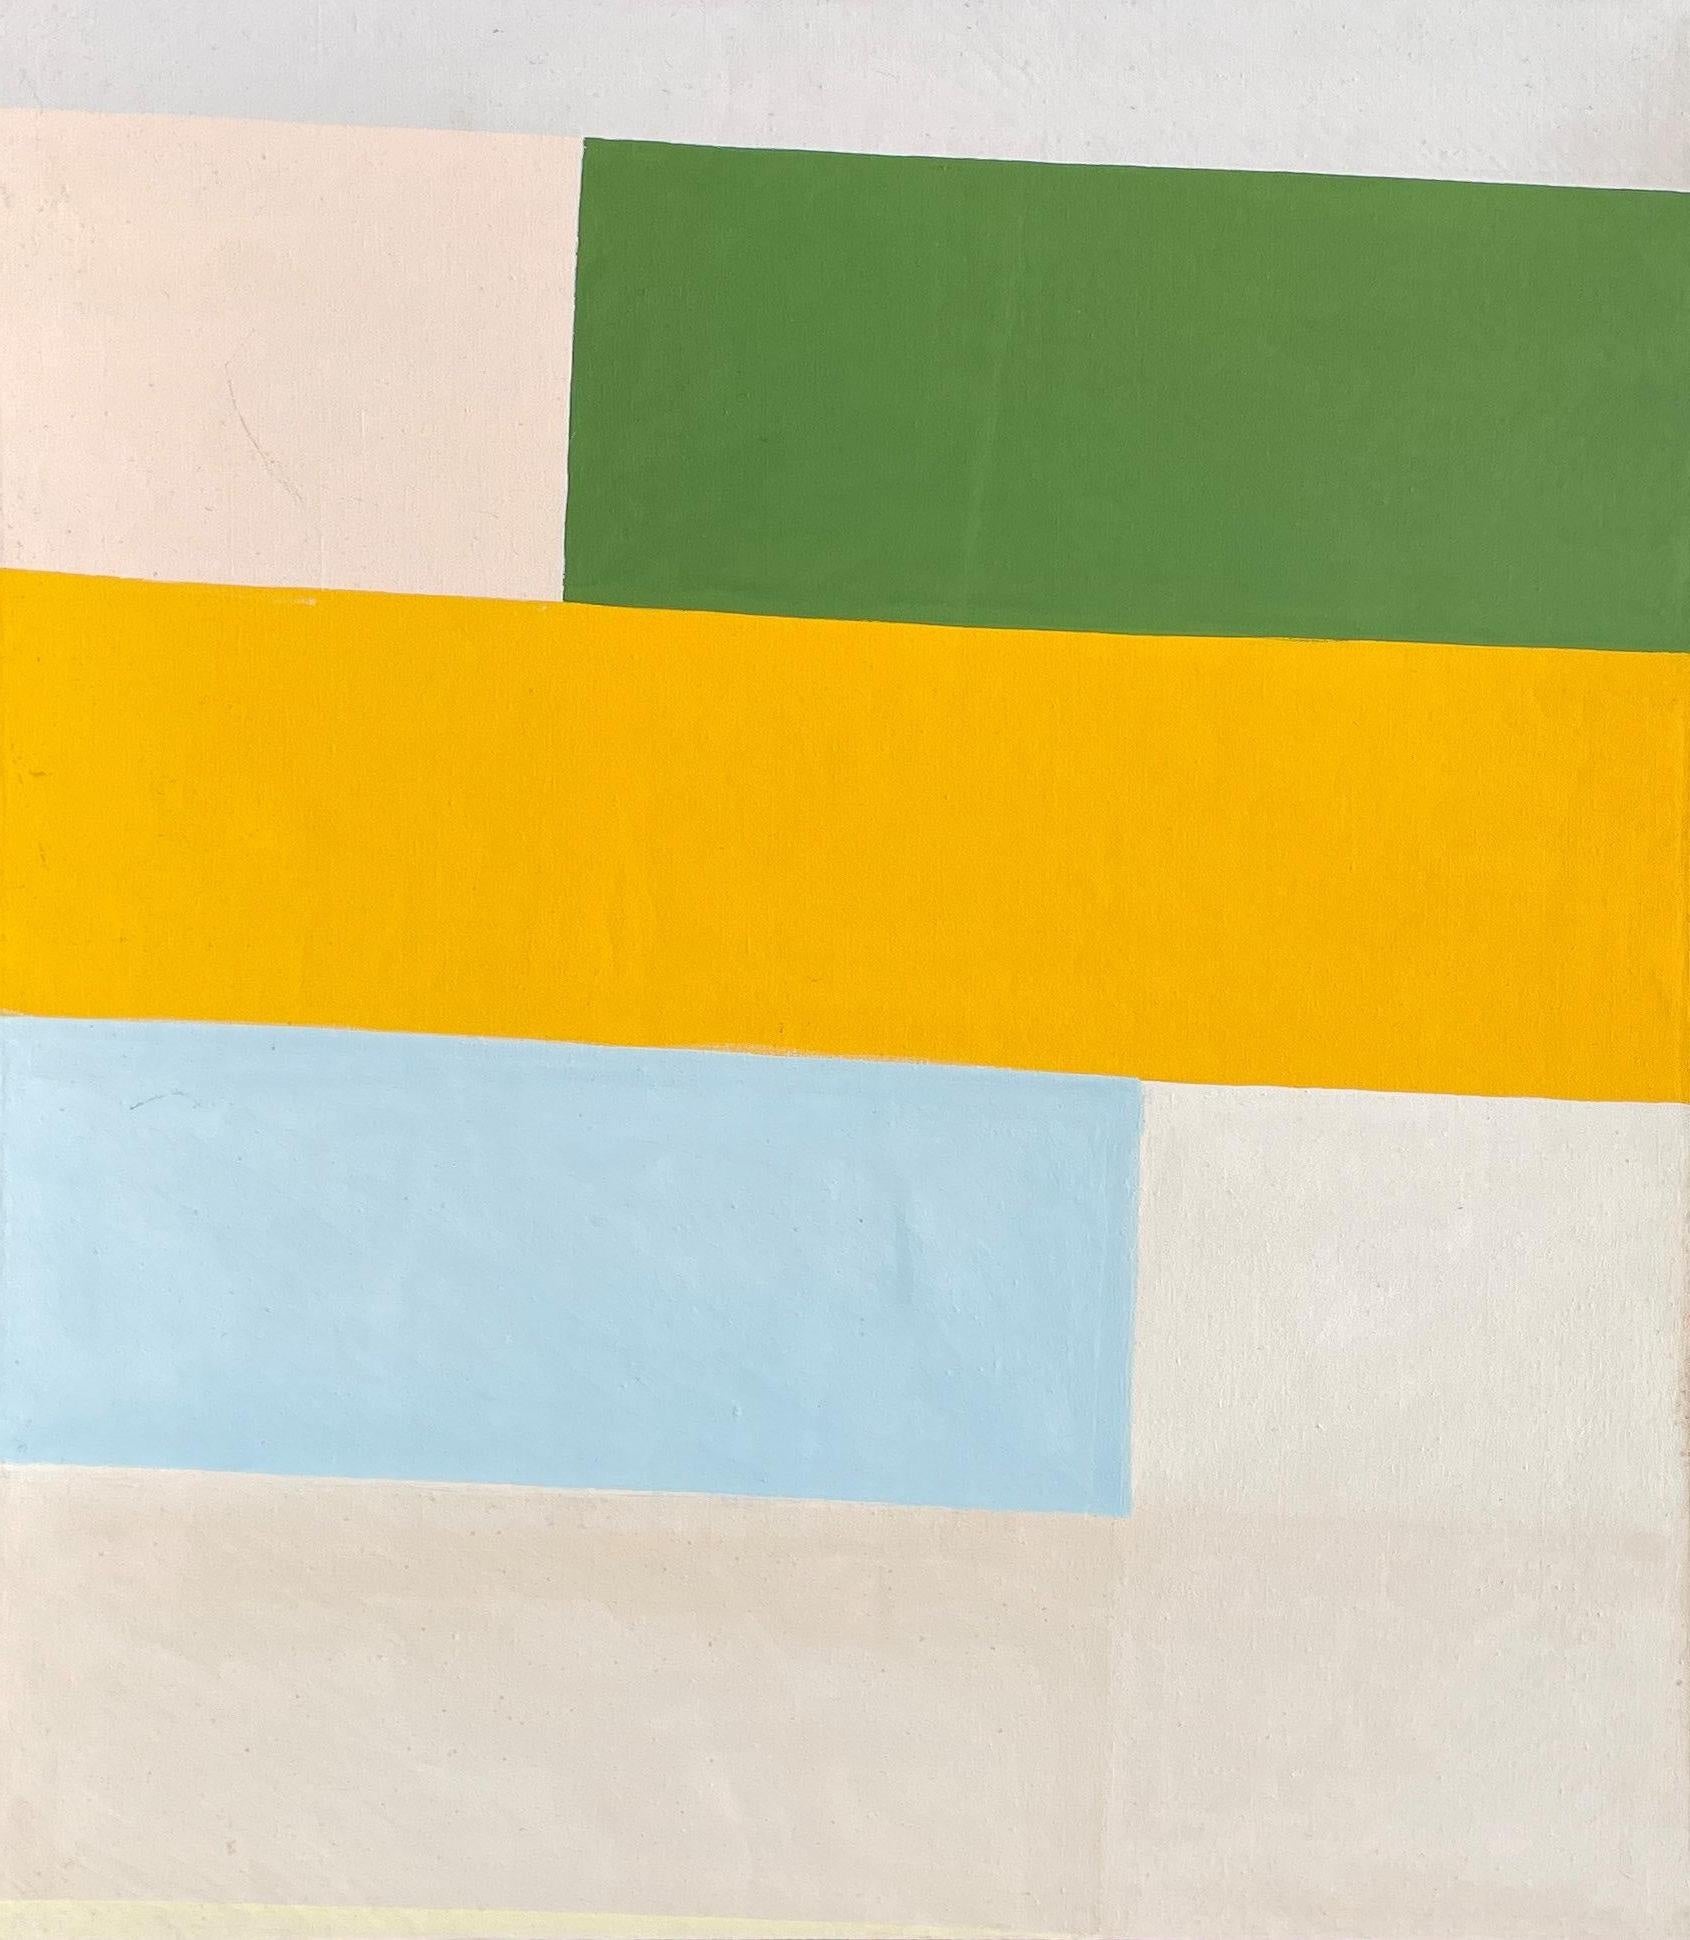 Calvert Coggeshall
Untitled, circa 1975
Oil on canvas
50 x 40 inches

Calvert Coggeshall worked as an abstract painter and interior designer primarily in Maine and New York City. From 1951 to 1978, he exhibited regularly with the Betty Parsons